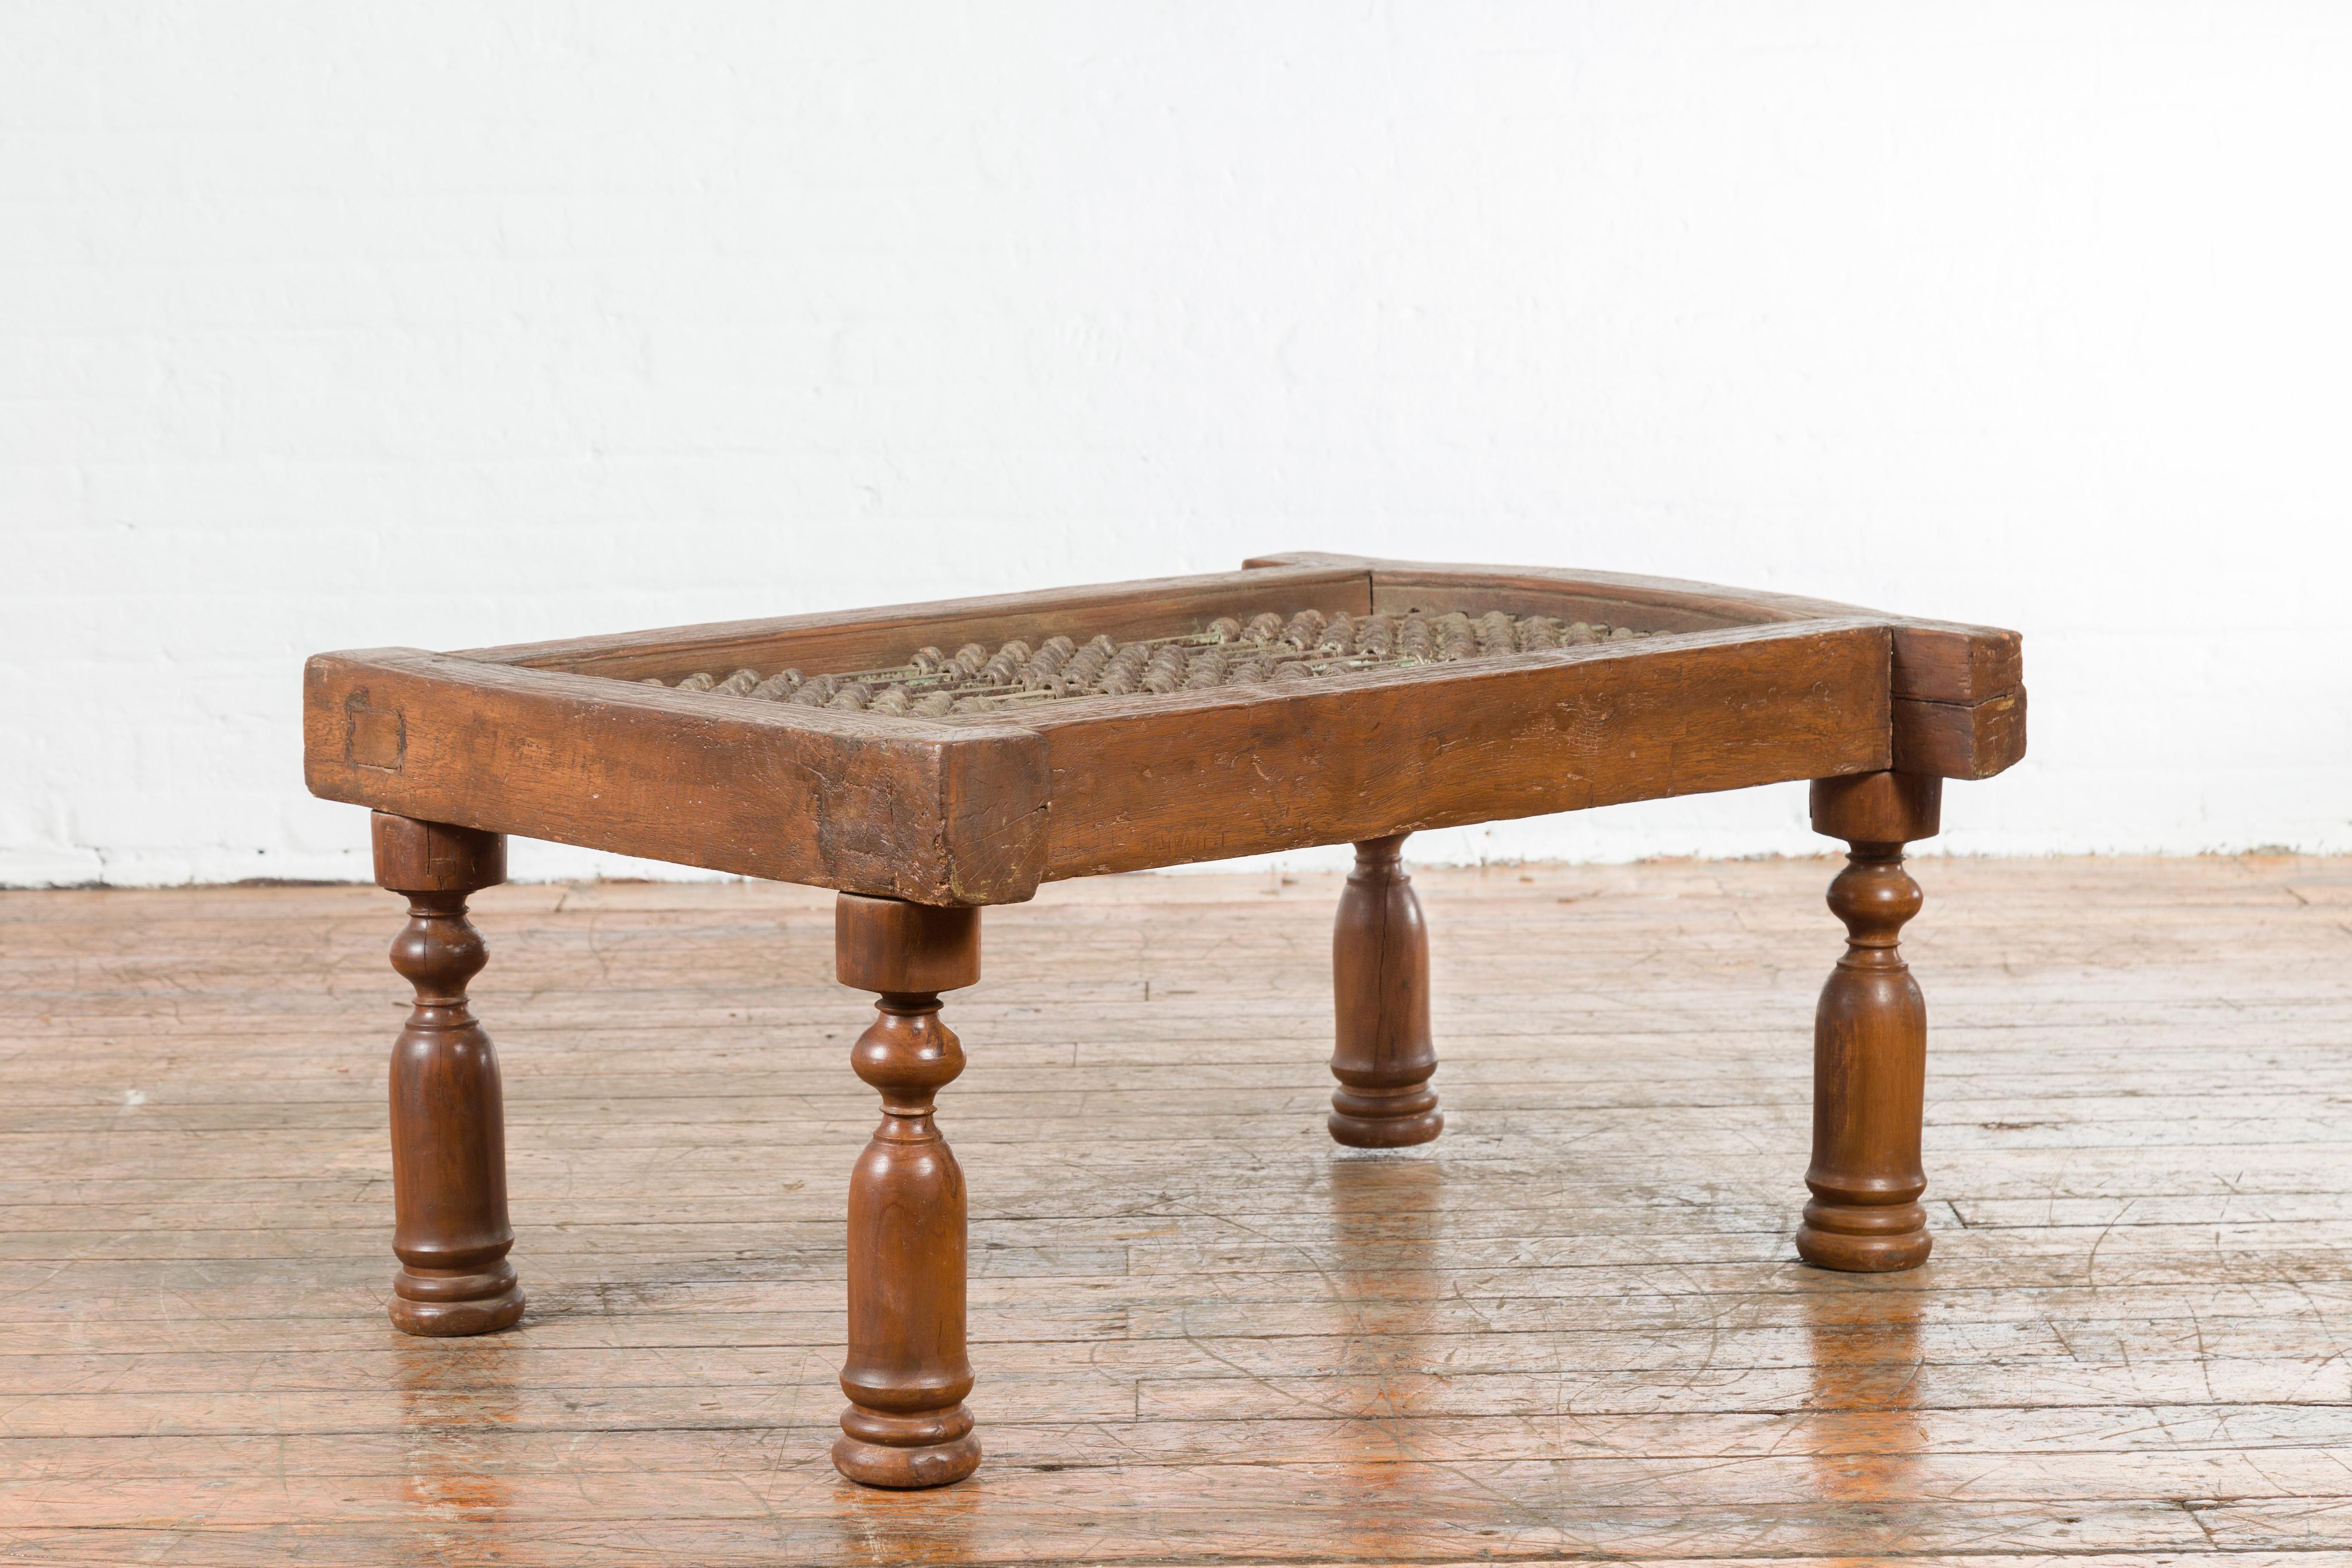 An antique Indian window grate with arching motifs from the early 20th century, made into a coffee table. Created in India during the early years of the 20th century, this Indian window grate is resting on four turned baluster-type legs. Perfectly